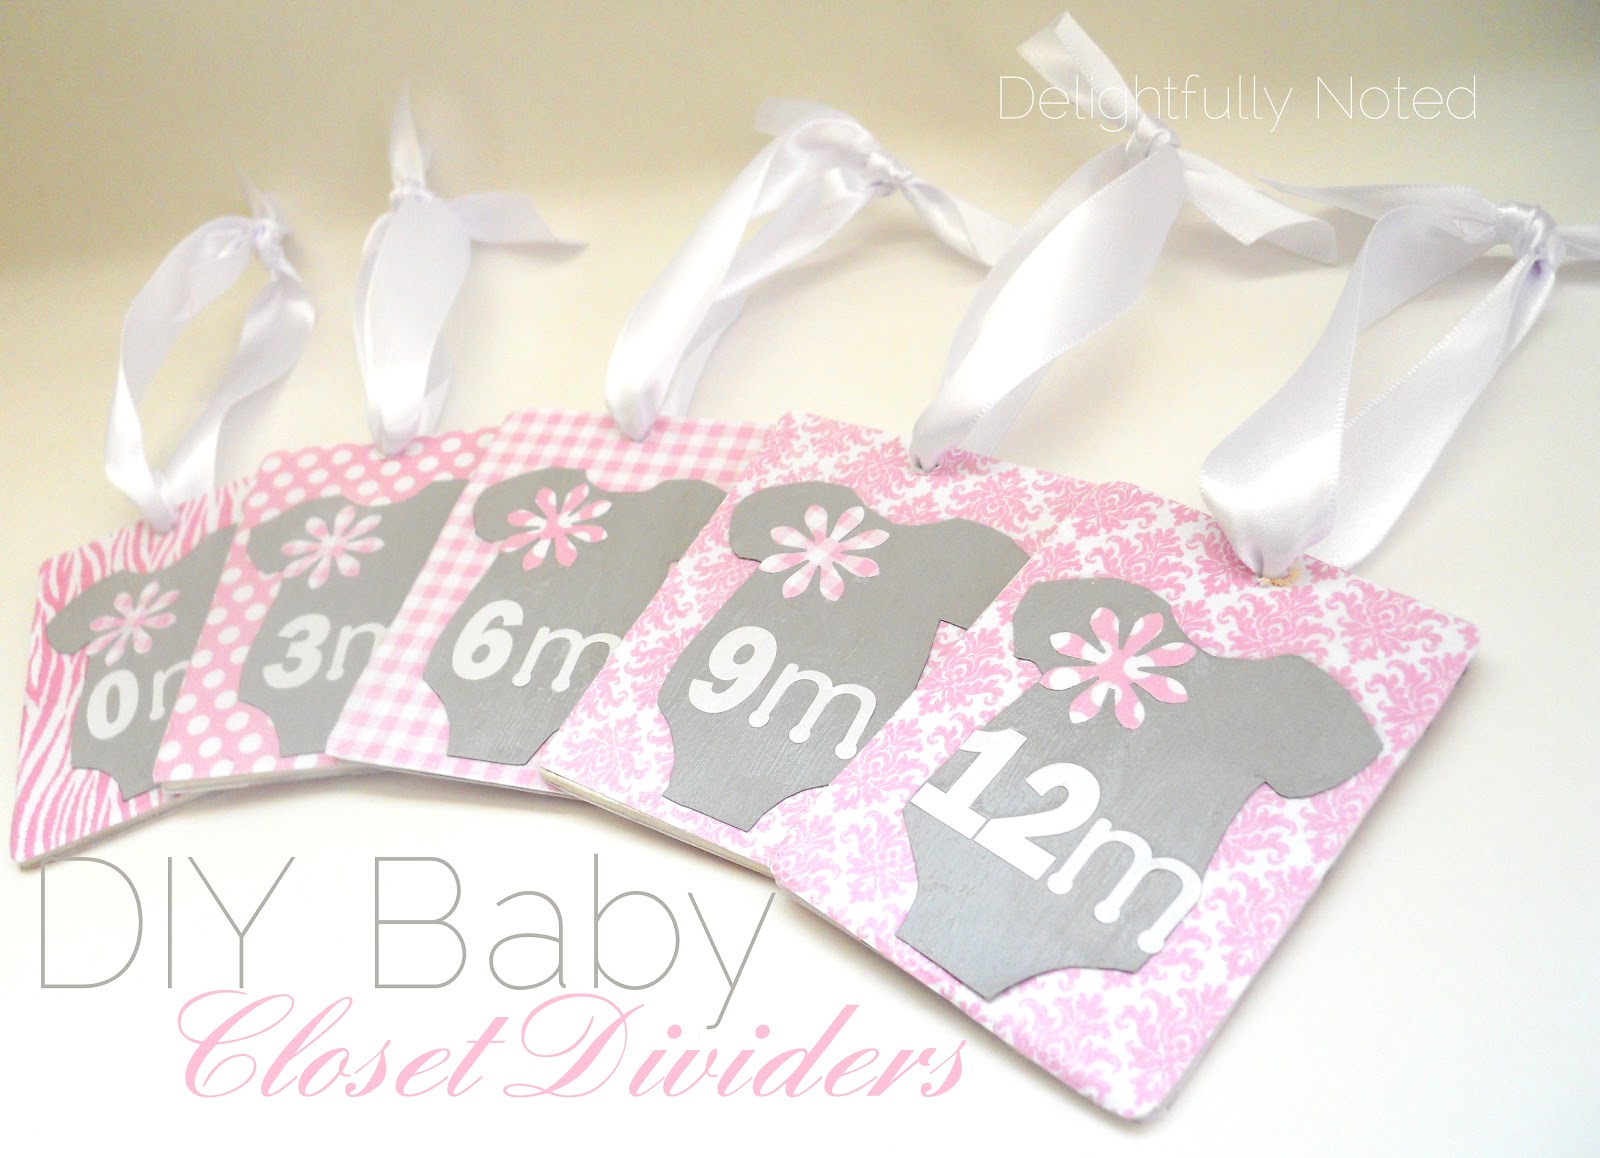 handmade-baby-gifts-diy-baby-closet-dividers-delightfully-noted